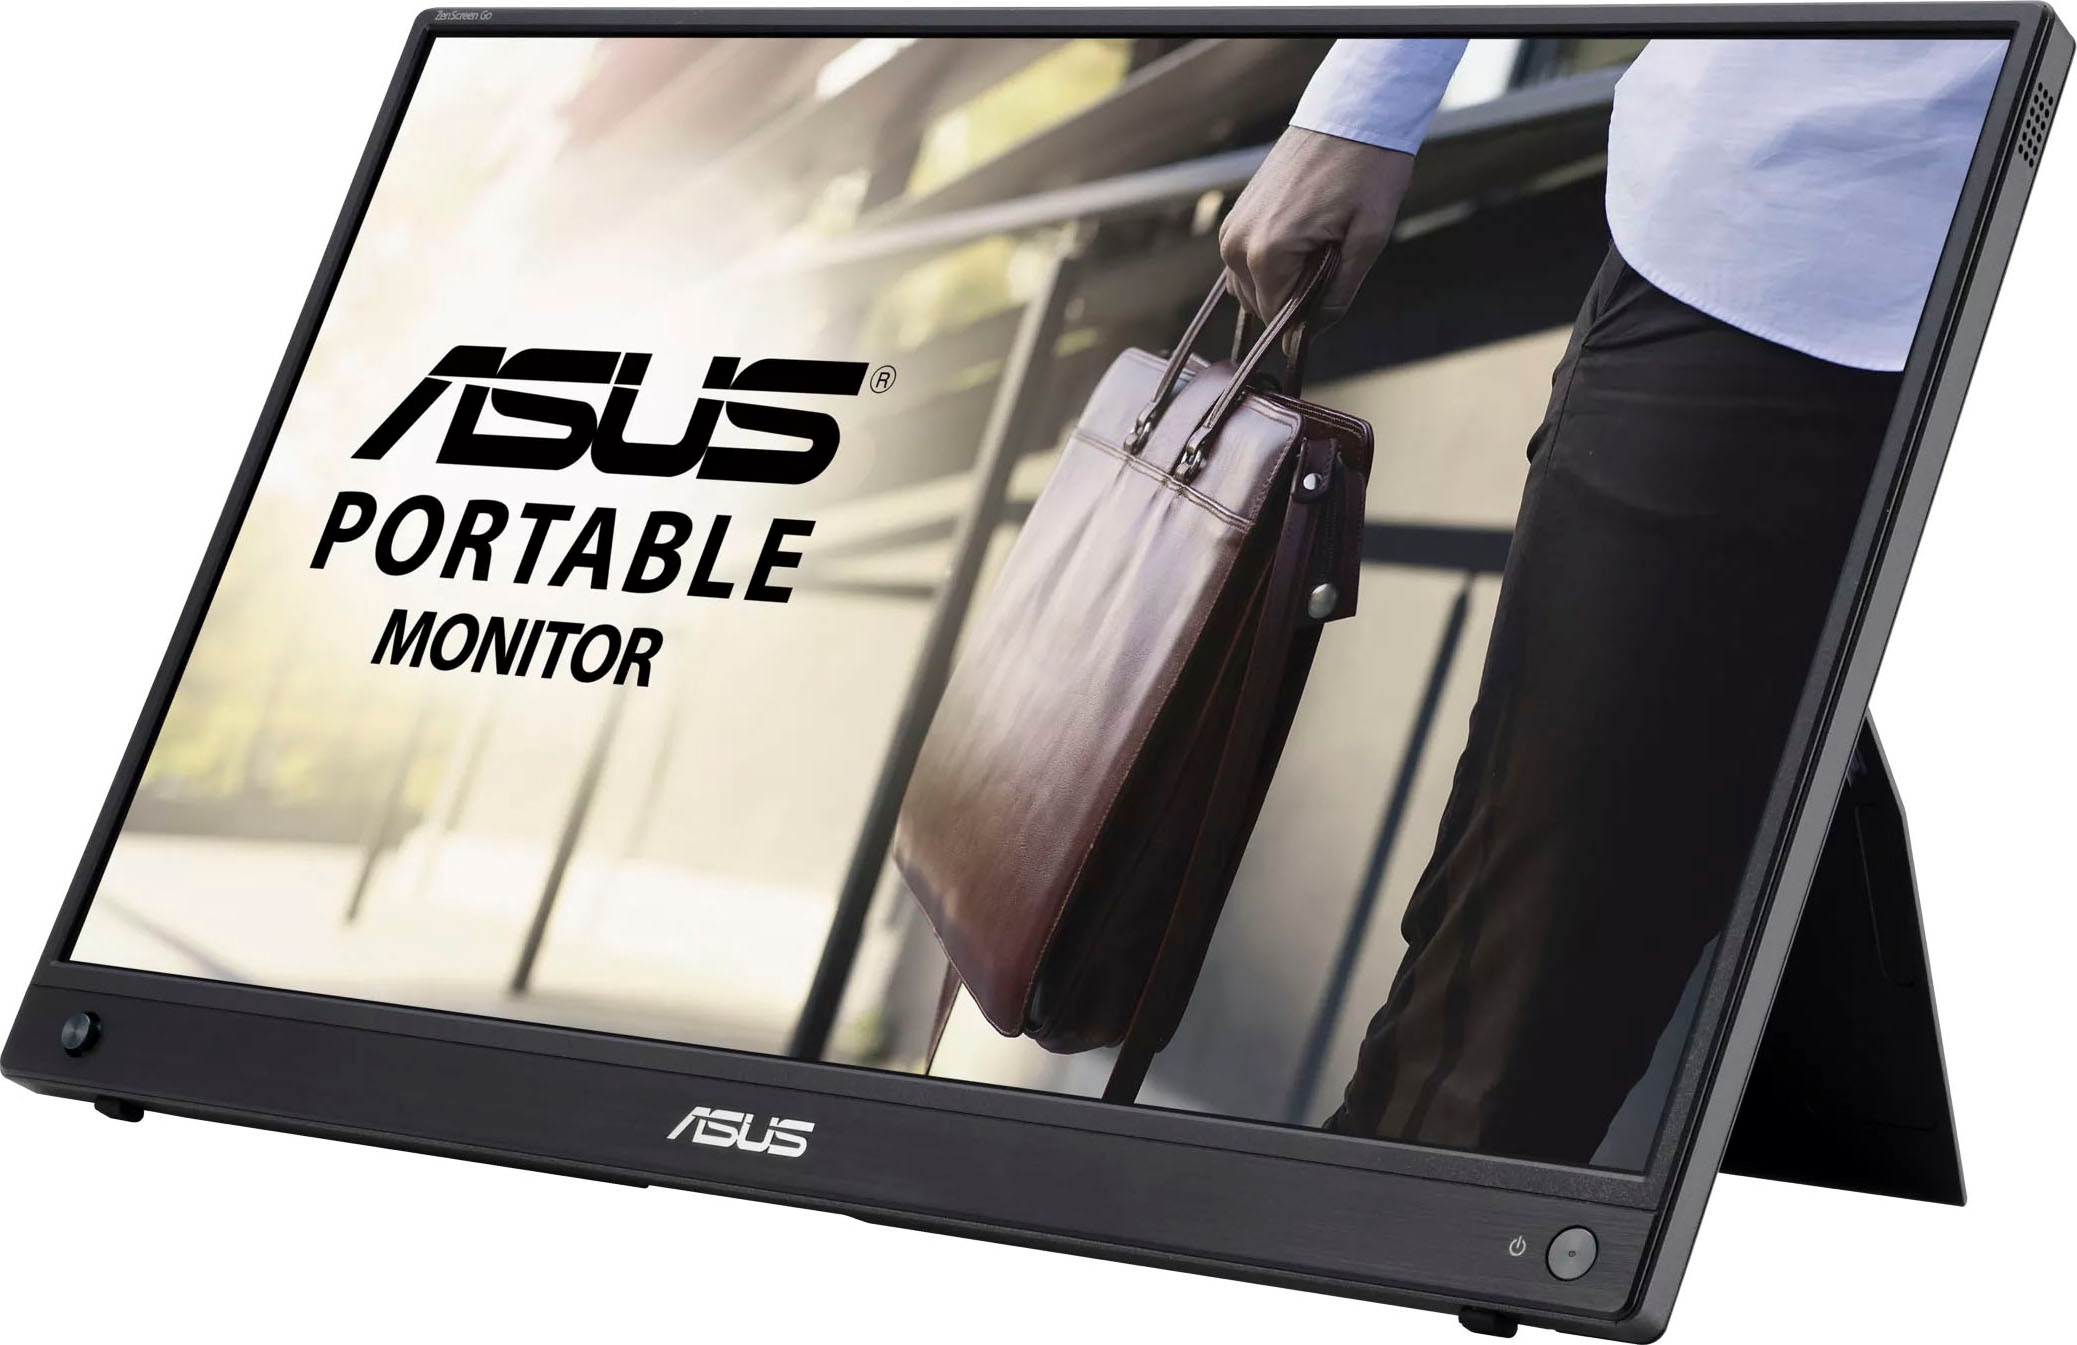 Asus Portabler Monitor »MB16AWP«, 40 cm/16 Zoll, 1920 x 1080 px, Full HD, 5 ms Reaktionszeit, 60 Hz